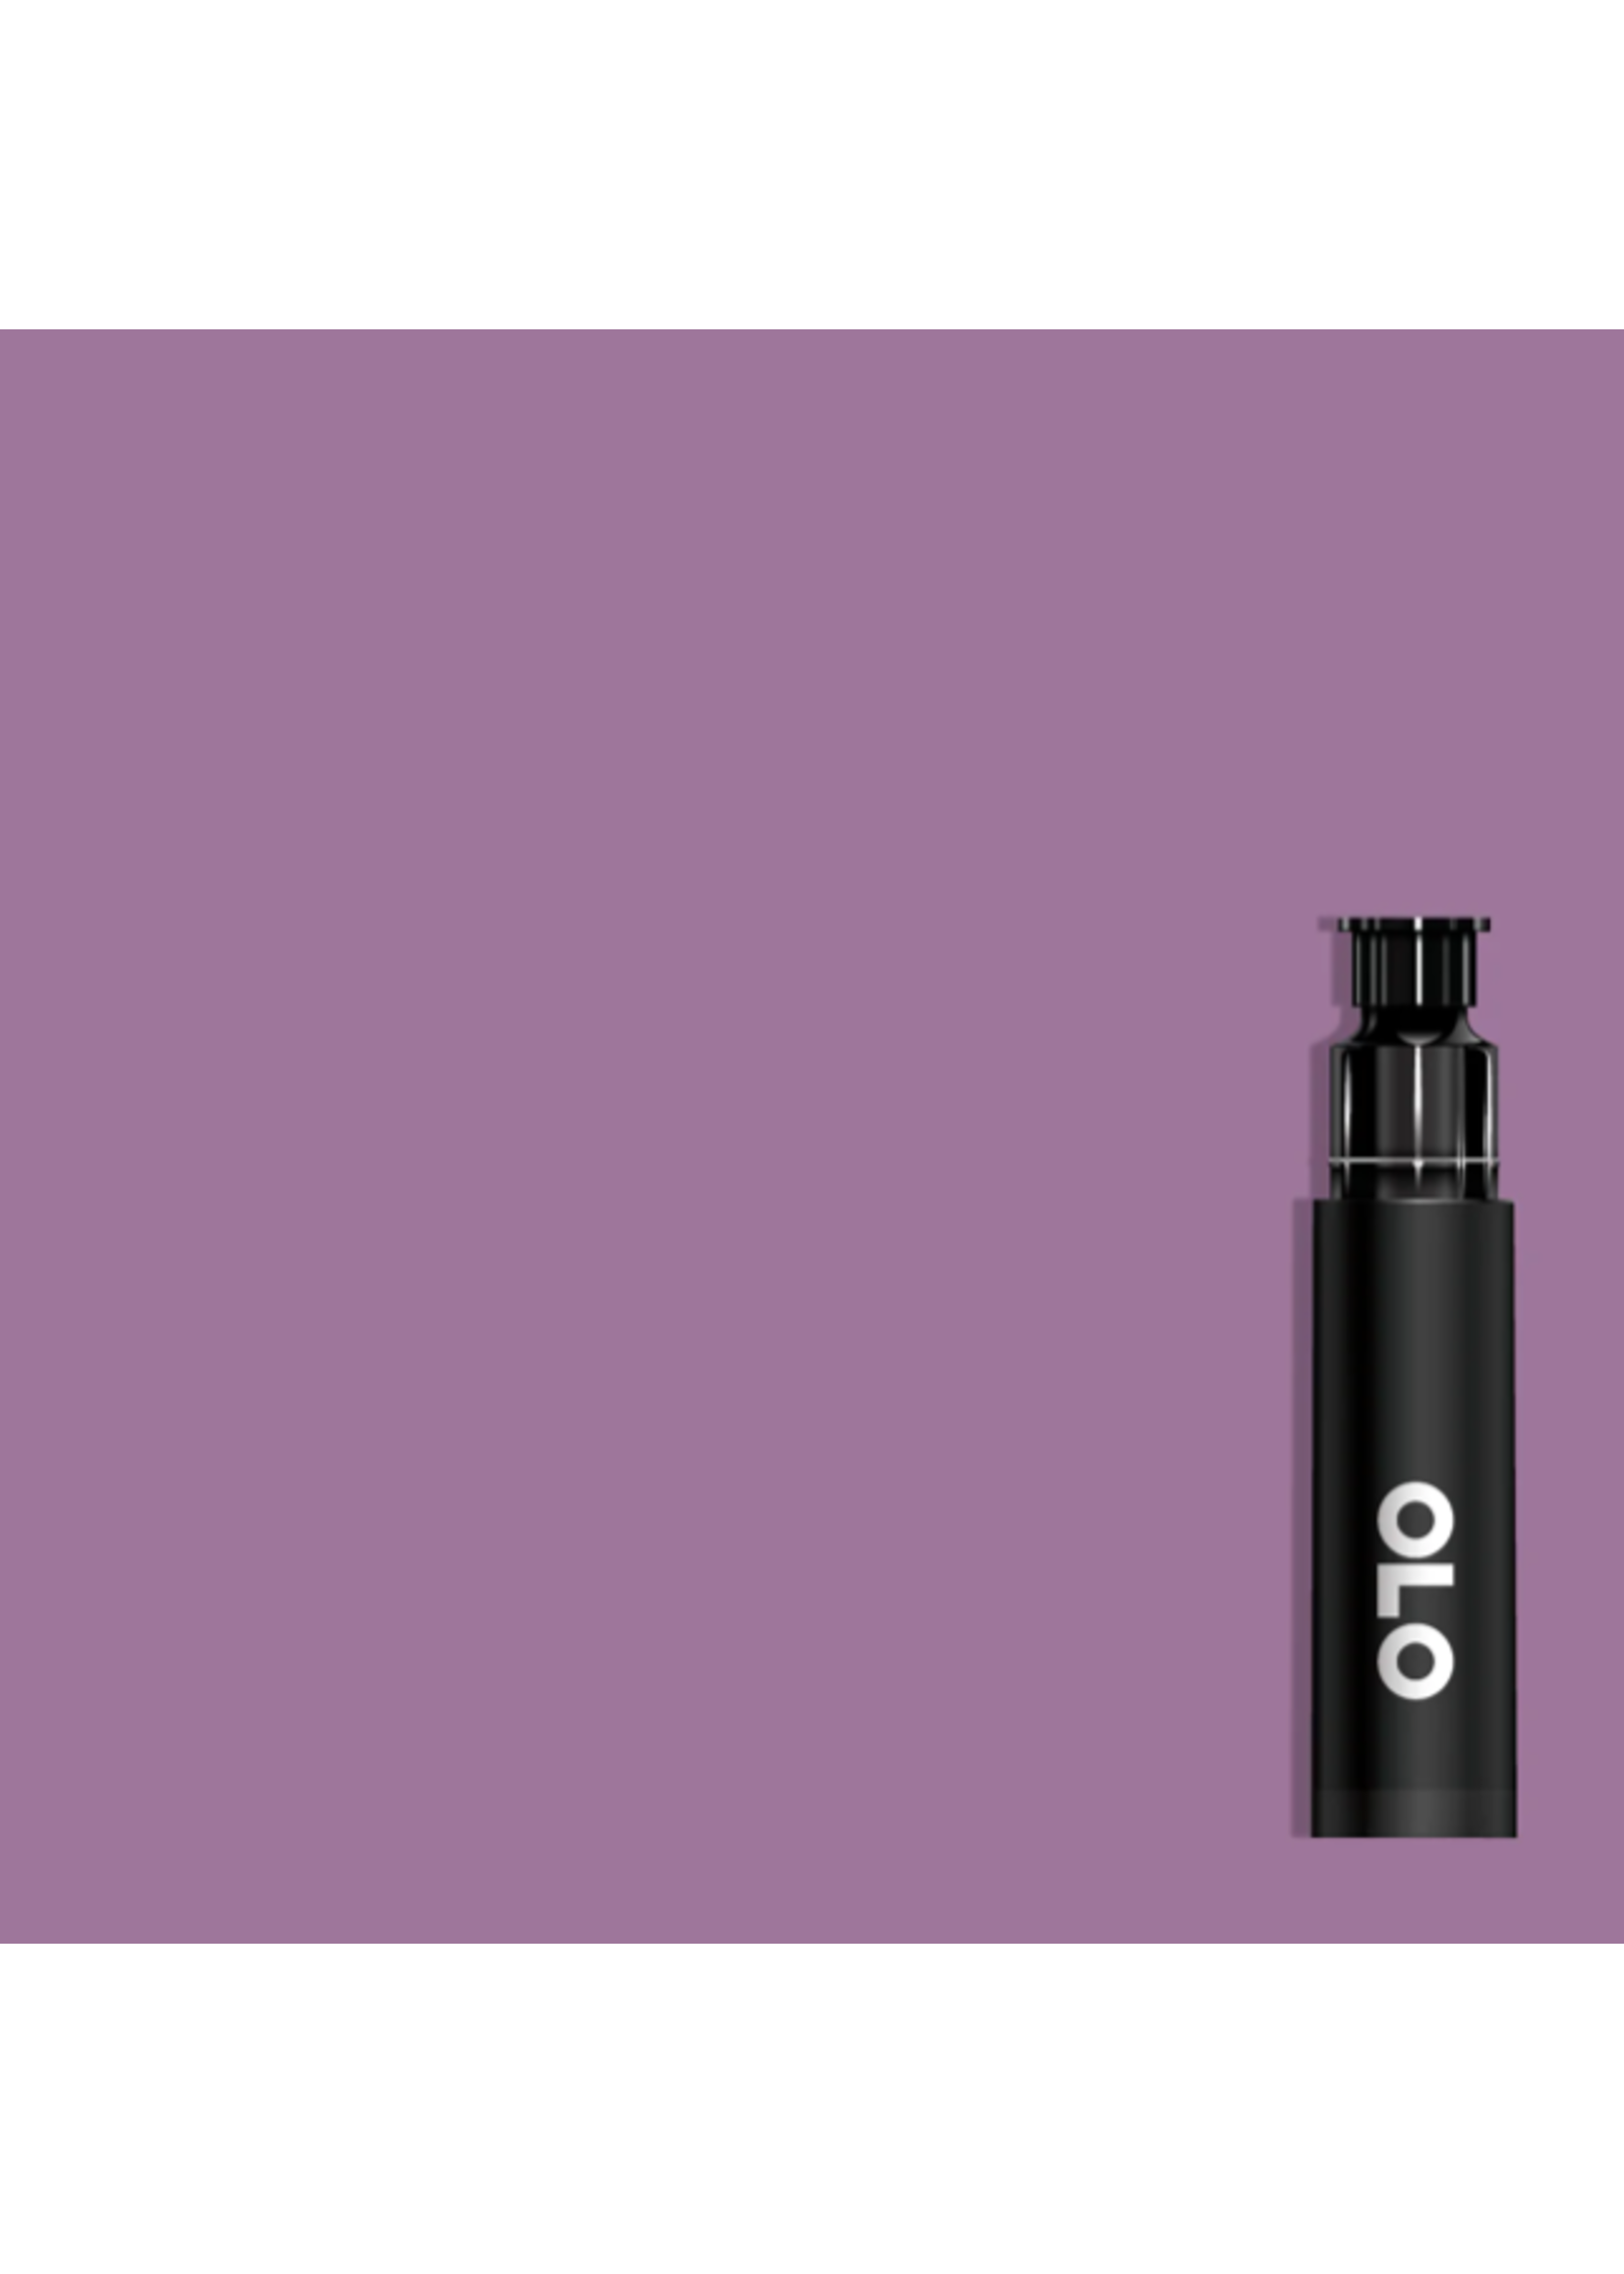 OLO OLO Brush Replacement Cartridge: Chive Blossoms